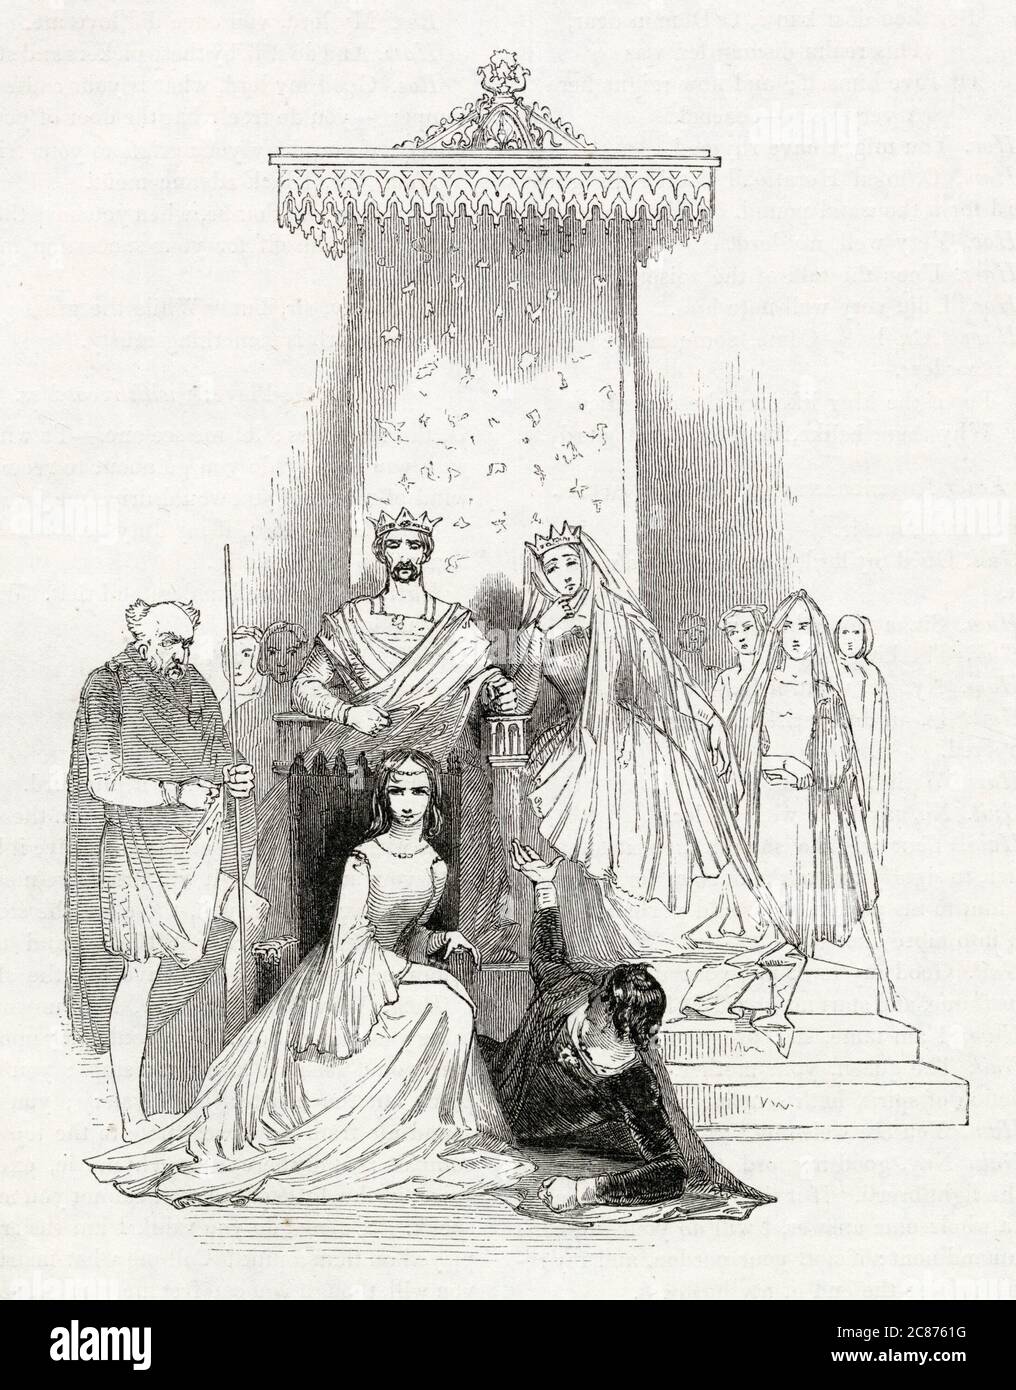 Illustration by Kenny Meadows to Hamlet, Prince of Denmark, by William Shakespeare. King Claudius, Queen Gertrude, Hamlet, Ophelia, Polonius and courtiers, watching the play within the play, designed to confirm Claudius's guilt in killing his brother.      Date: 1840 Stock Photo